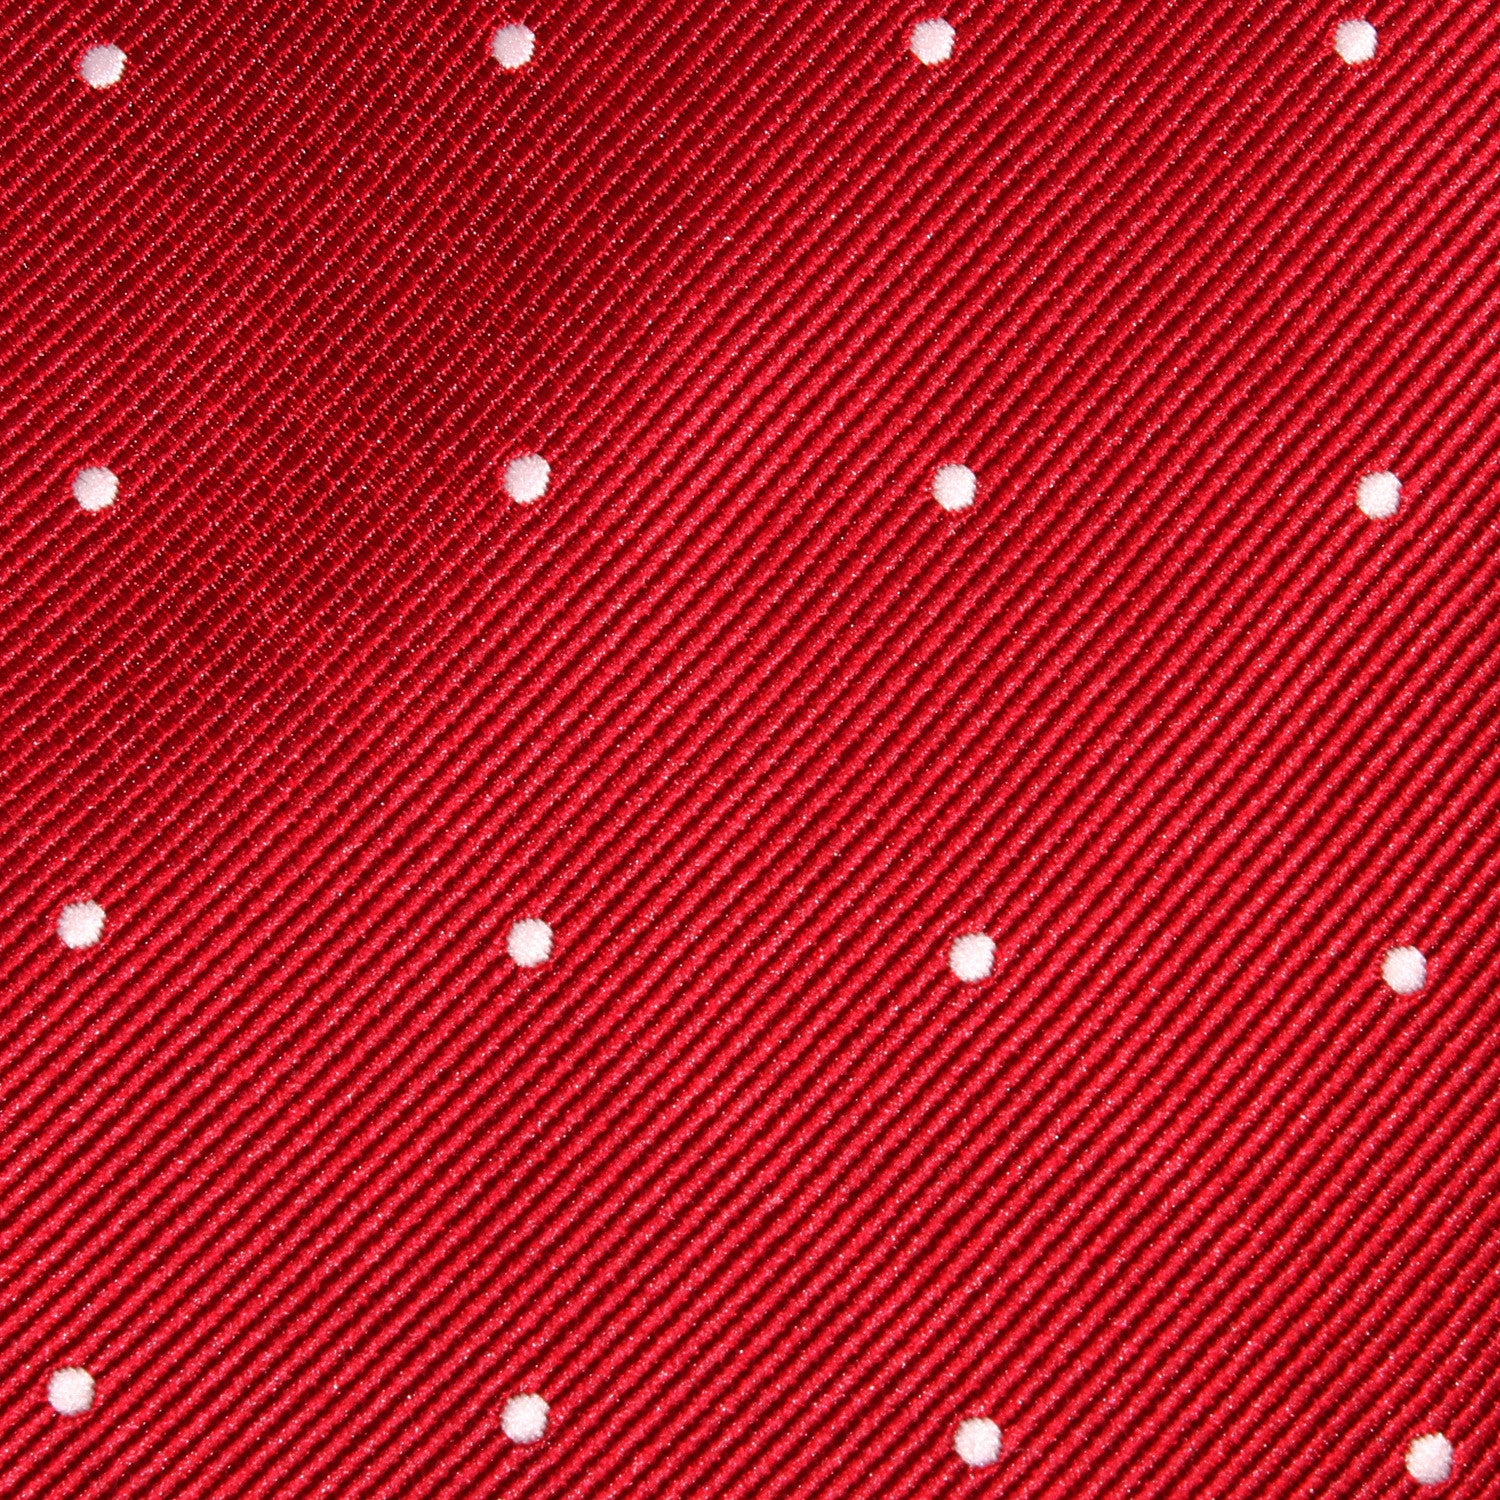 Maroon with White Polka Dots Necktie Fabric